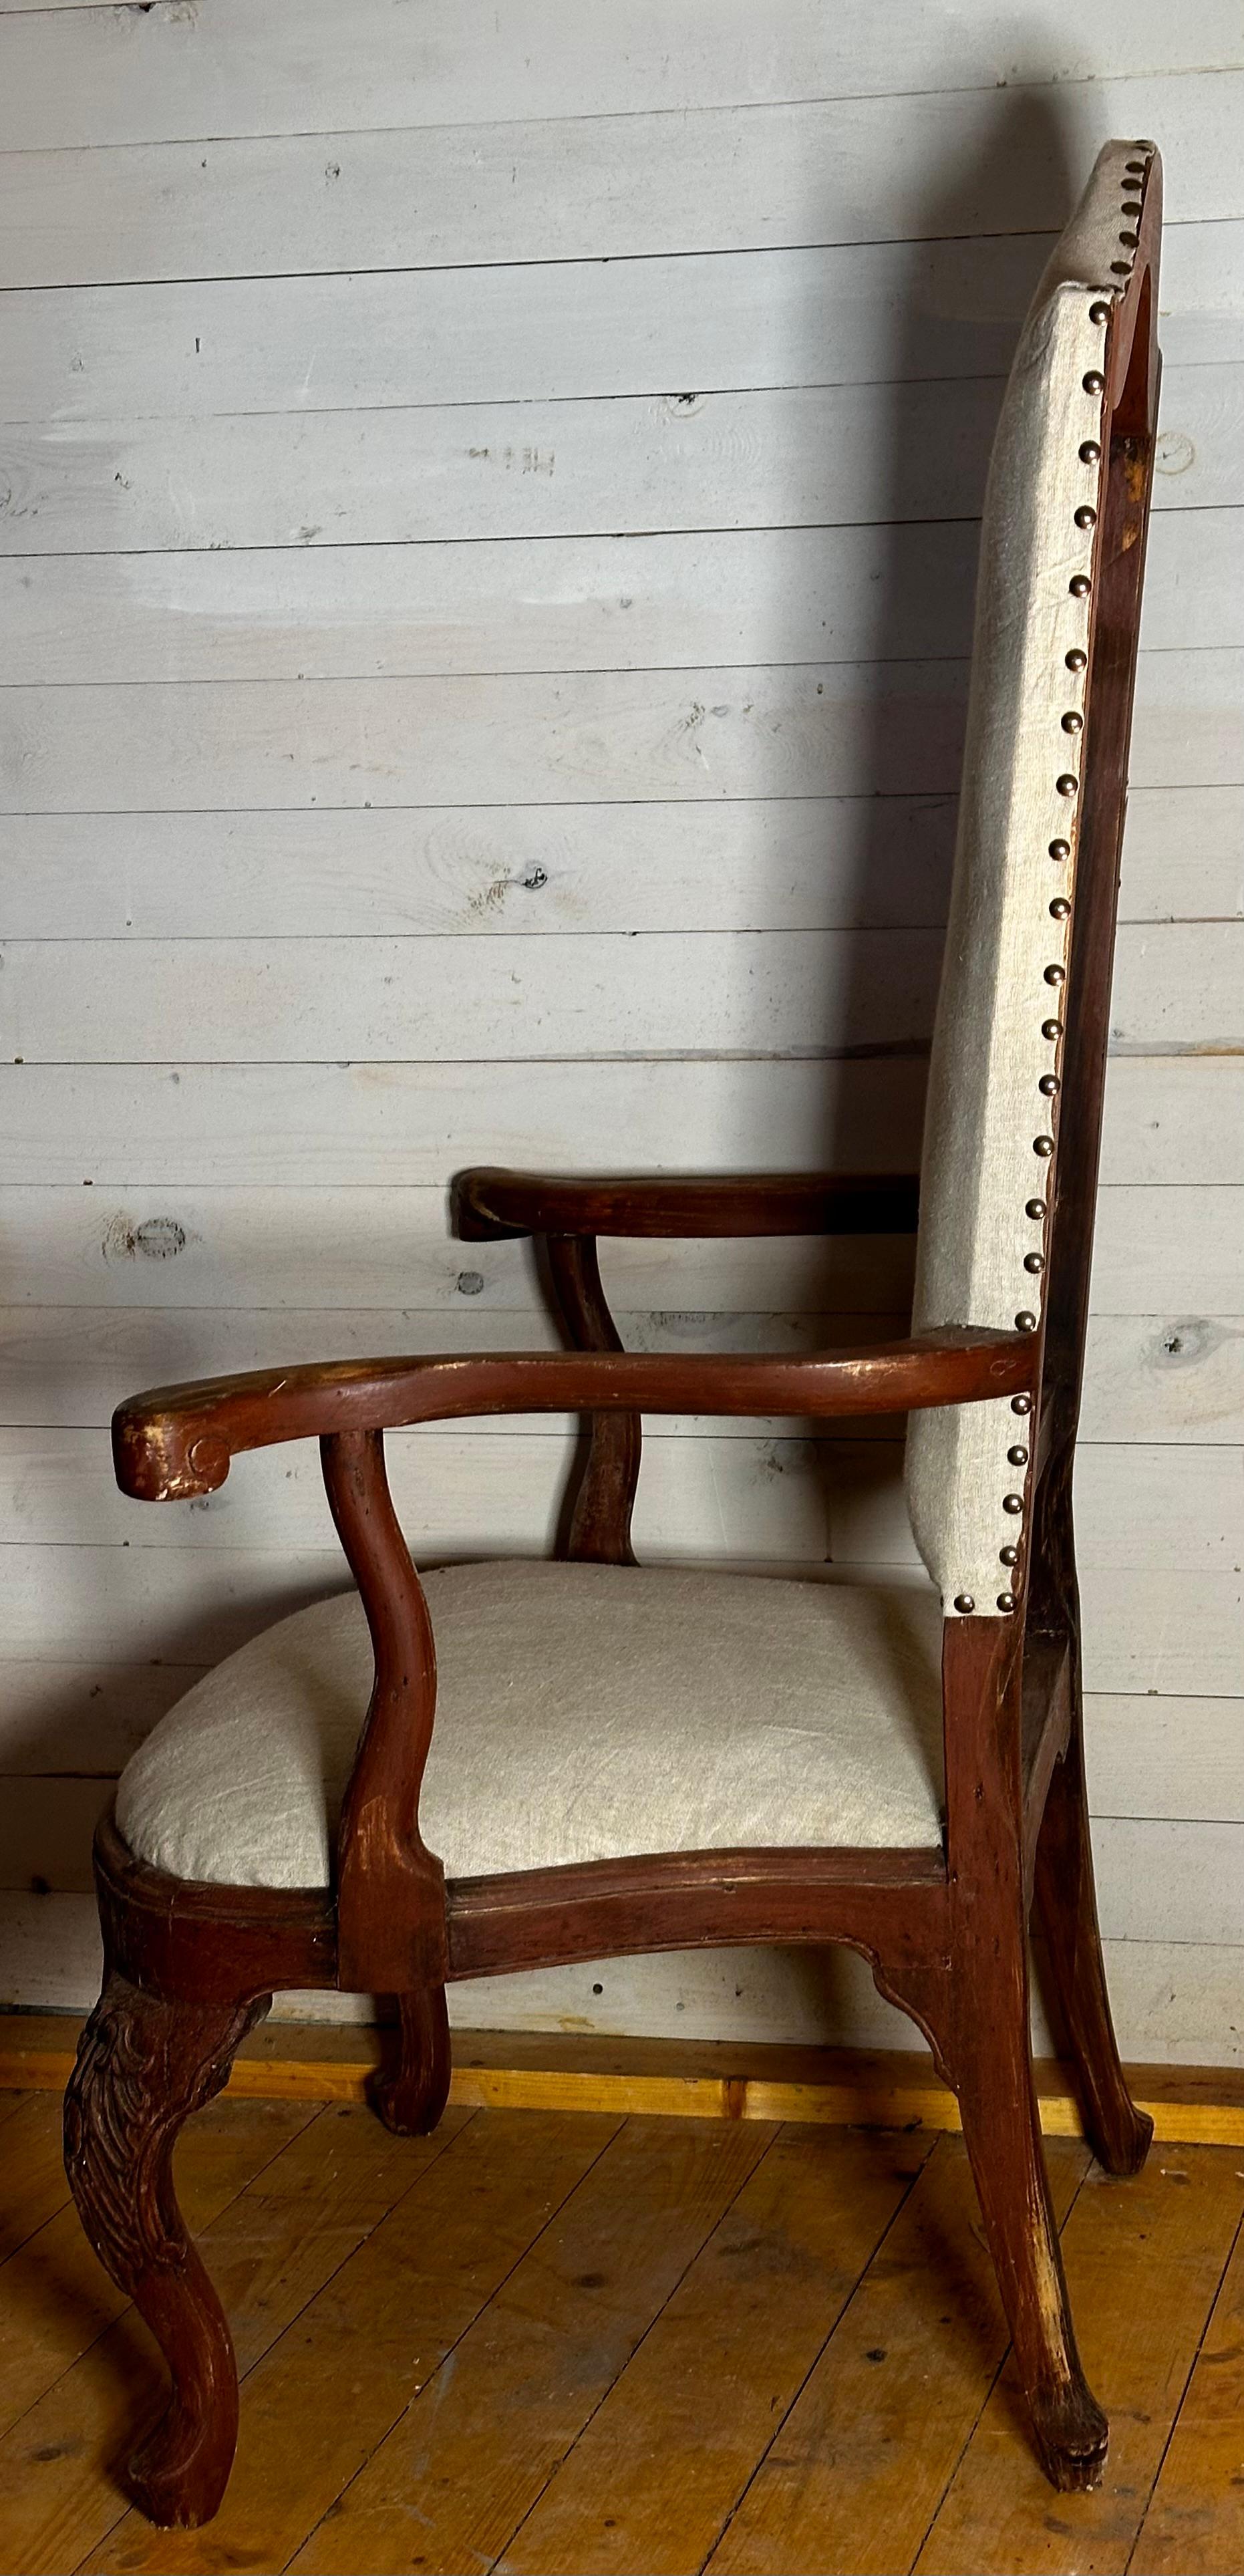 Armchair made in Sweden about 1740. The armchair has an unusual high back, that could suggest that it were made for a Government. The original color is well preserved with much of indigenous textures remains.